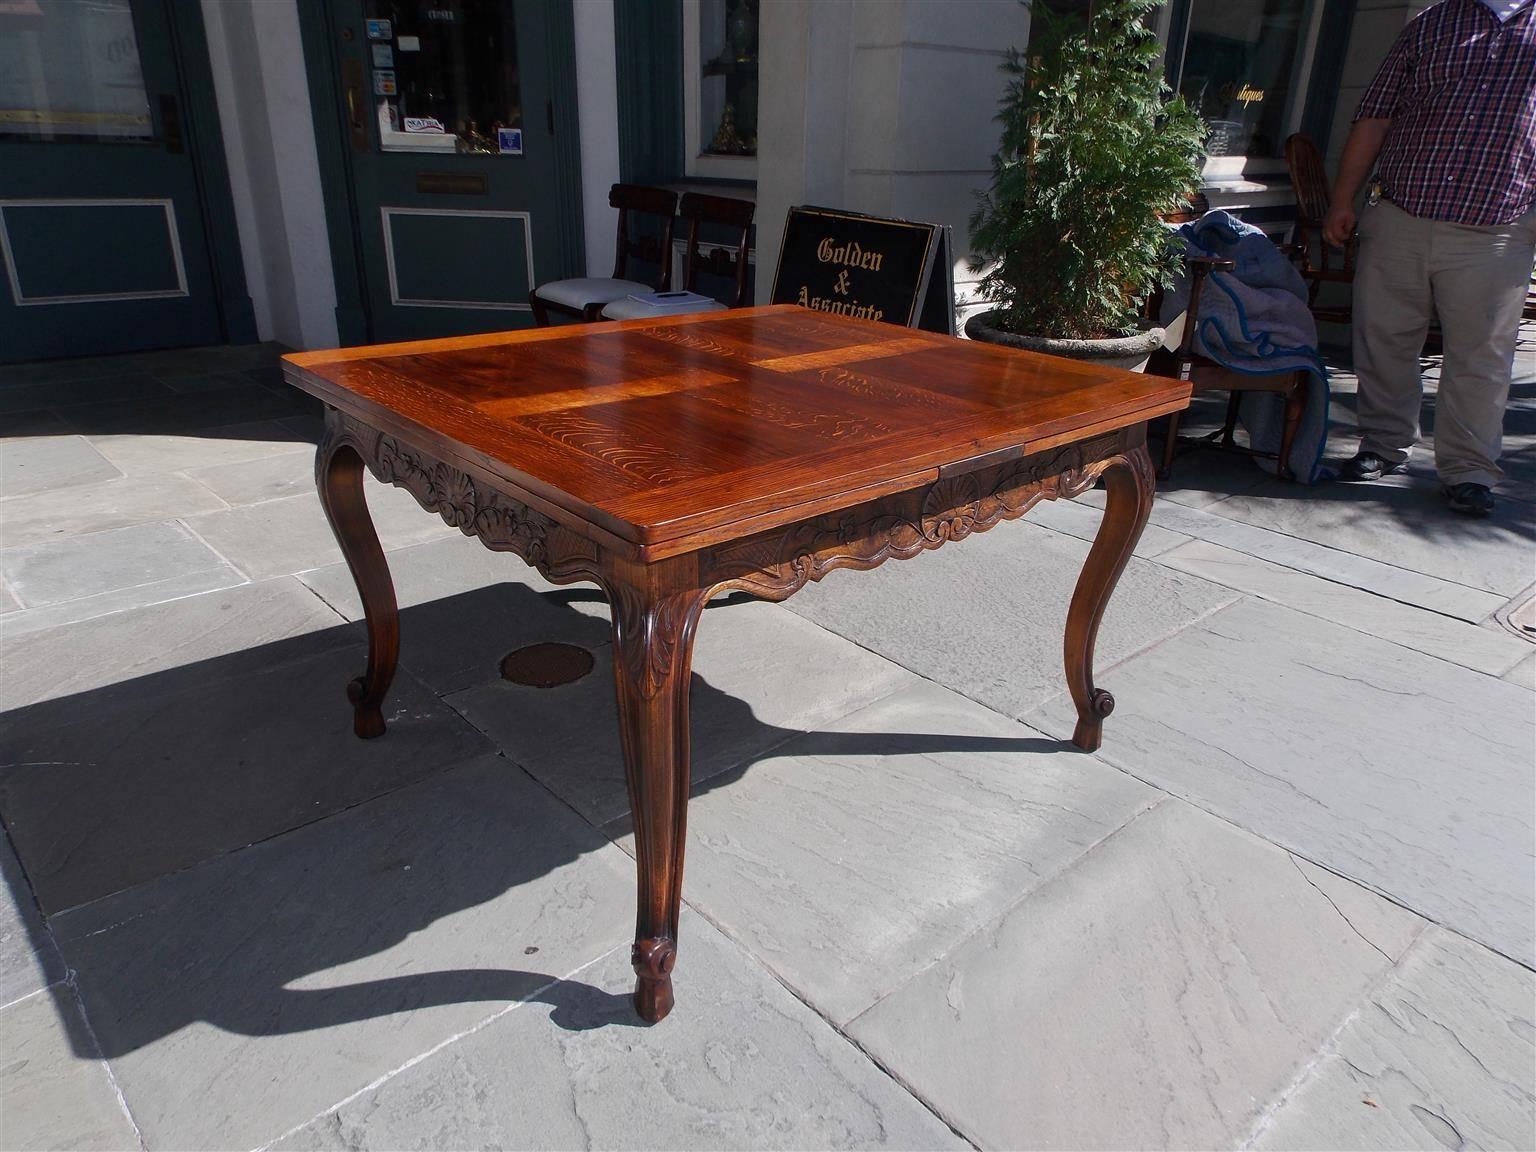 French Provincial Italian White Oak Refractory Dinining Room Table, Circa 1840